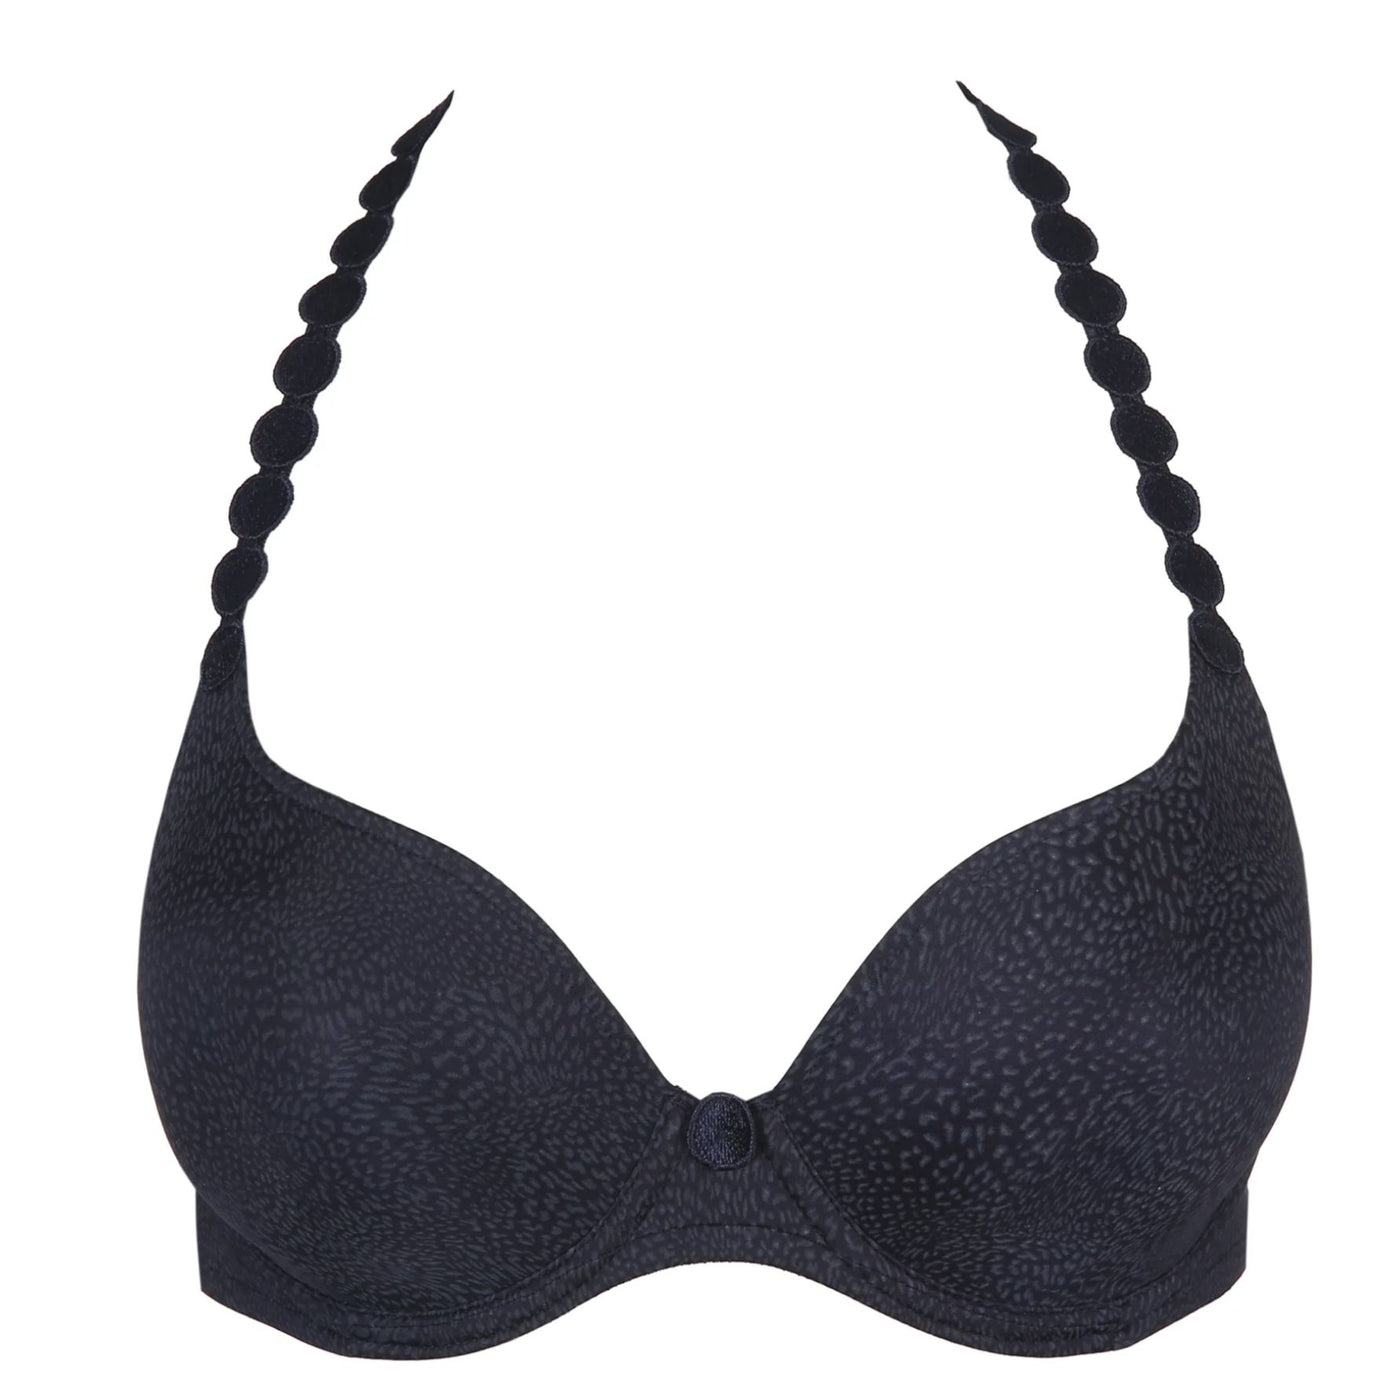 Marie Jo Tom Padded Heart Shape Bra in Magestic Blue 0120826-Bras-Marie Jo-Magestic Blue-34-D-Anna Bella Fine Lingerie, Reveal Your Most Gorgeous Self!